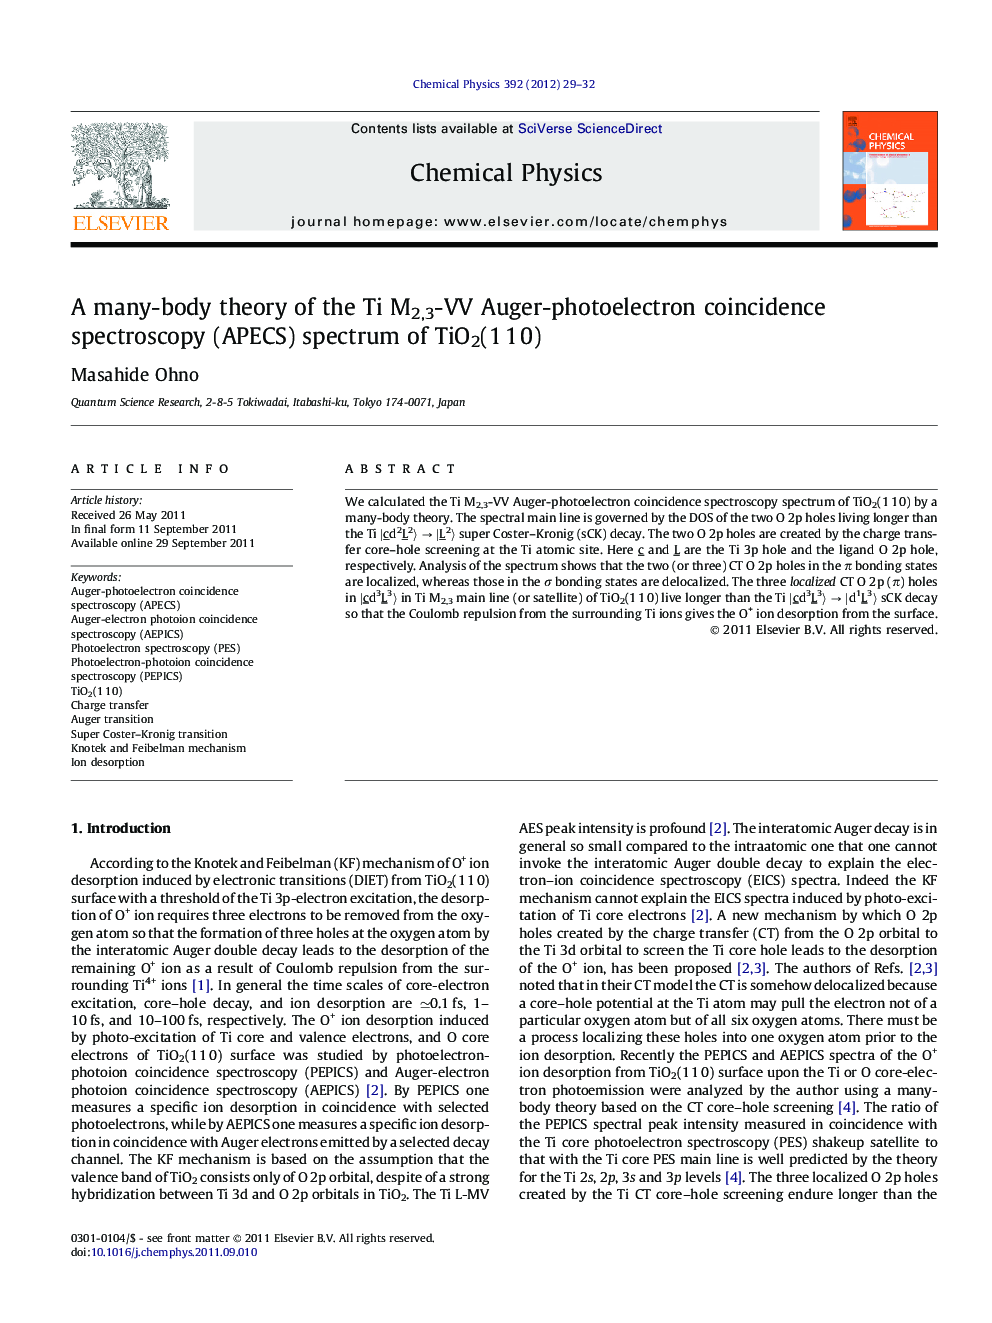 A many-body theory of the Ti M2,3-VV Auger-photoelectron coincidence spectroscopy (APECS) spectrum of TiO2(1Â 1Â 0)